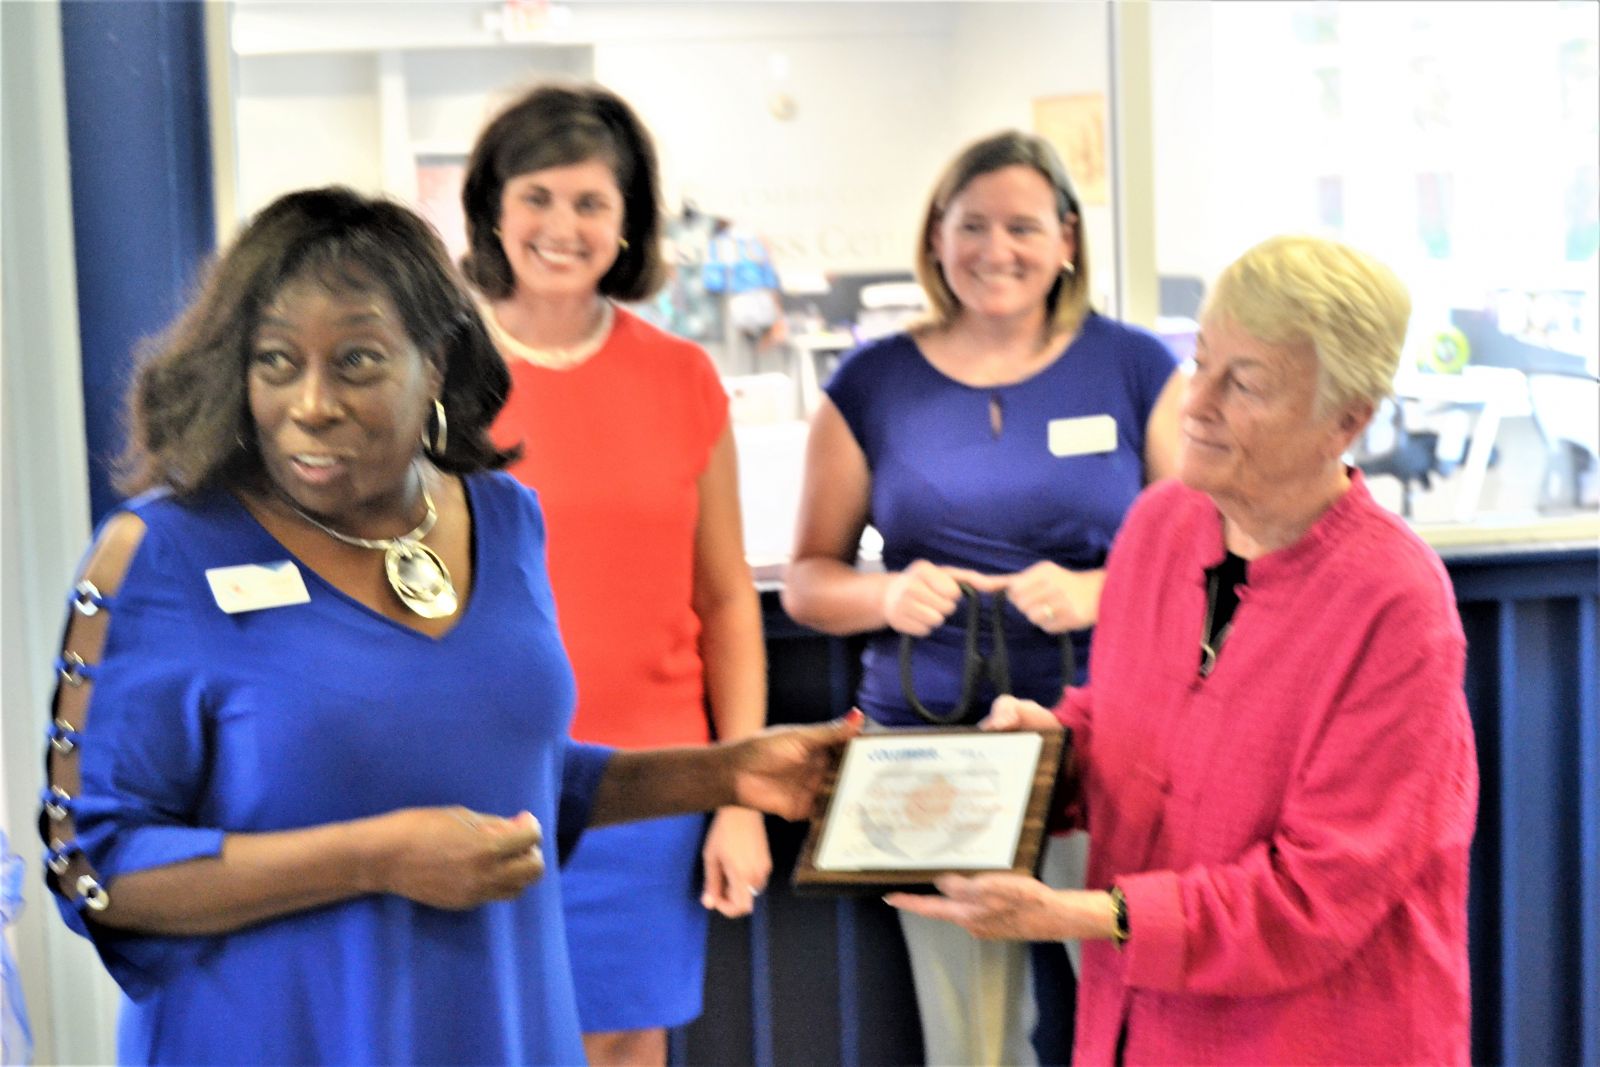 Henri Baskins, executive vice president of the Columbia Chamber of Commerce (from left), Women's Business Center of South Carolina co-founders Katherine Swartz-Hilton and Kasie Whitener, and Columbia College president Carol Moore celebrate Thursday's ribbon cutting. (Photo/Travis Boland)